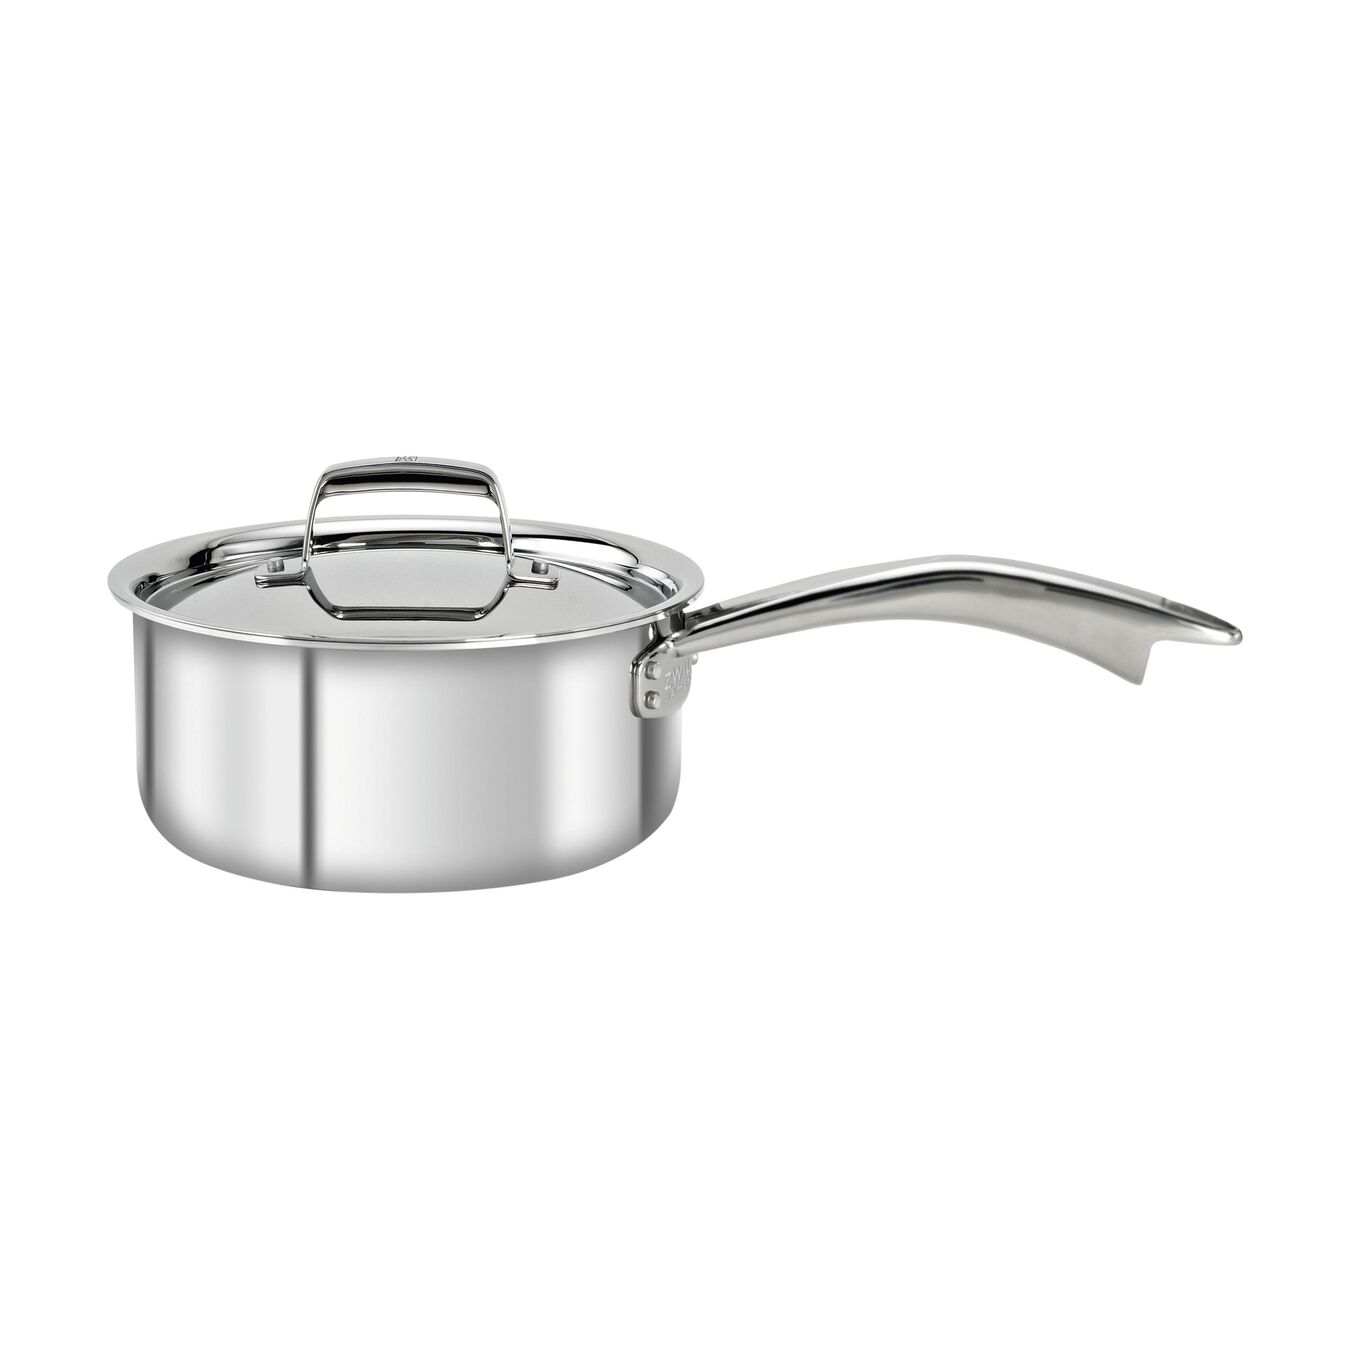 2.8 l 18/10 Stainless Steel round Sauce pan,,large 1